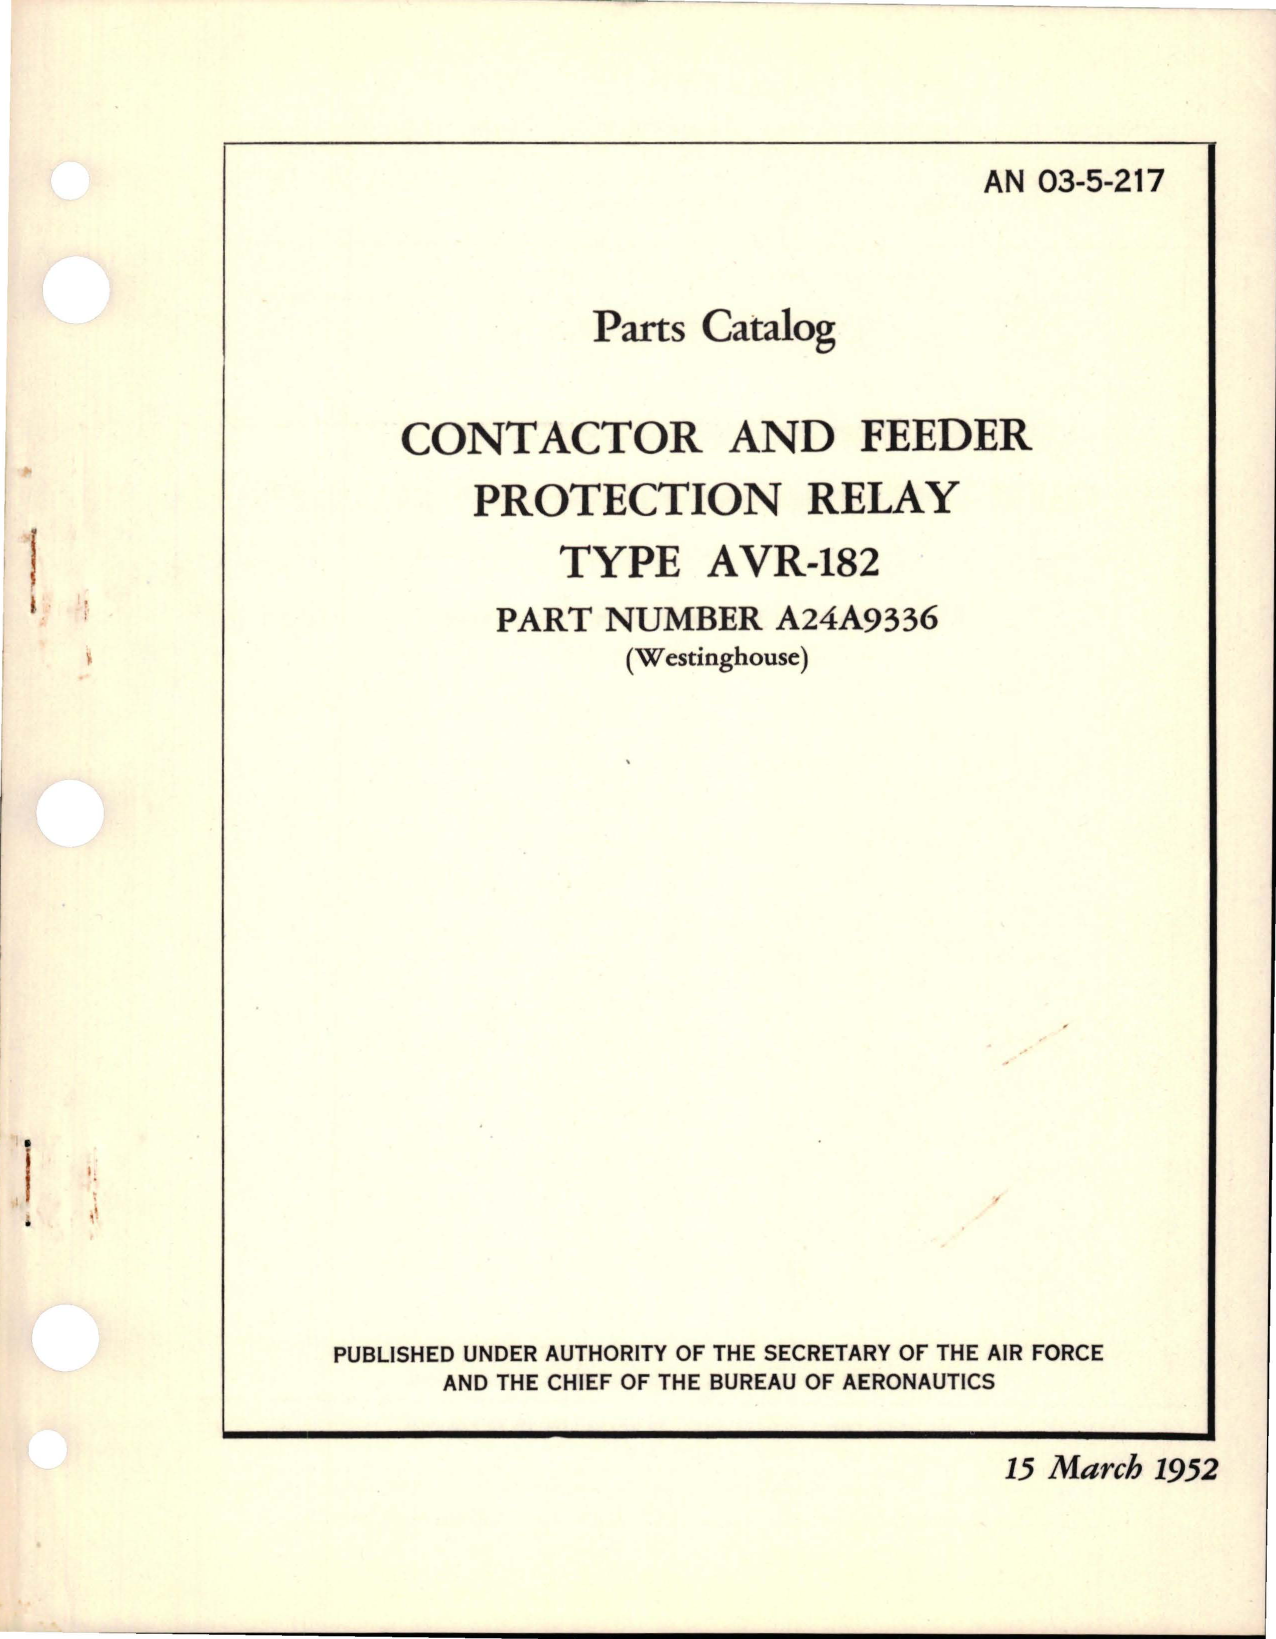 Sample page 1 from AirCorps Library document: Parts Catalog for Contactor and Feeder Protection Relay - Type AVR-182 - Part A24A9336